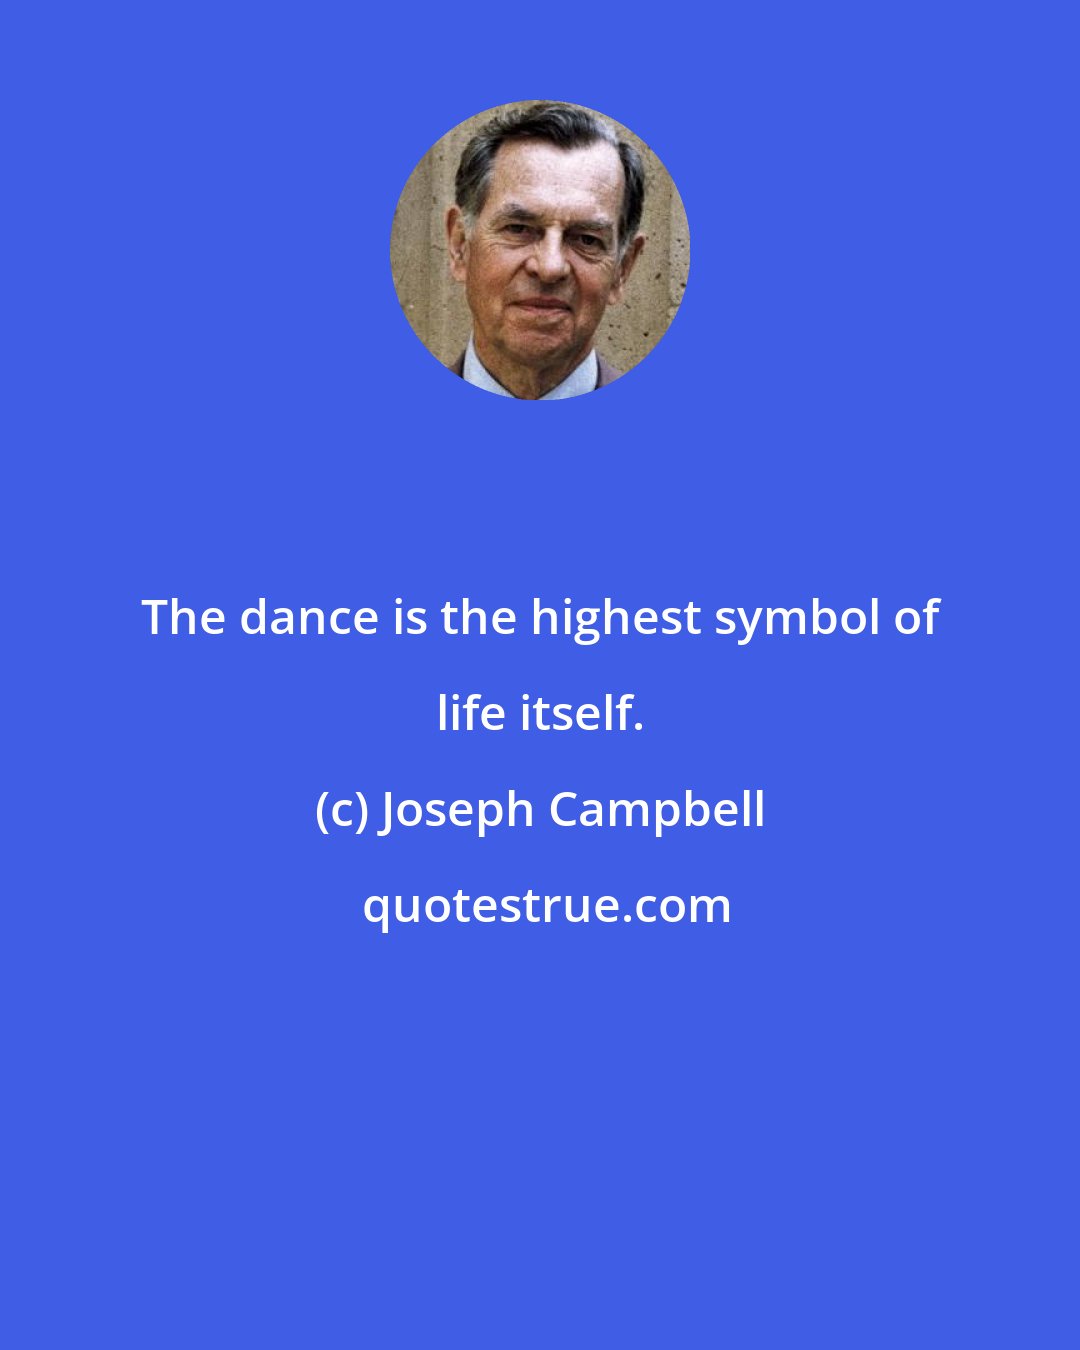 Joseph Campbell: The dance is the highest symbol of life itself.